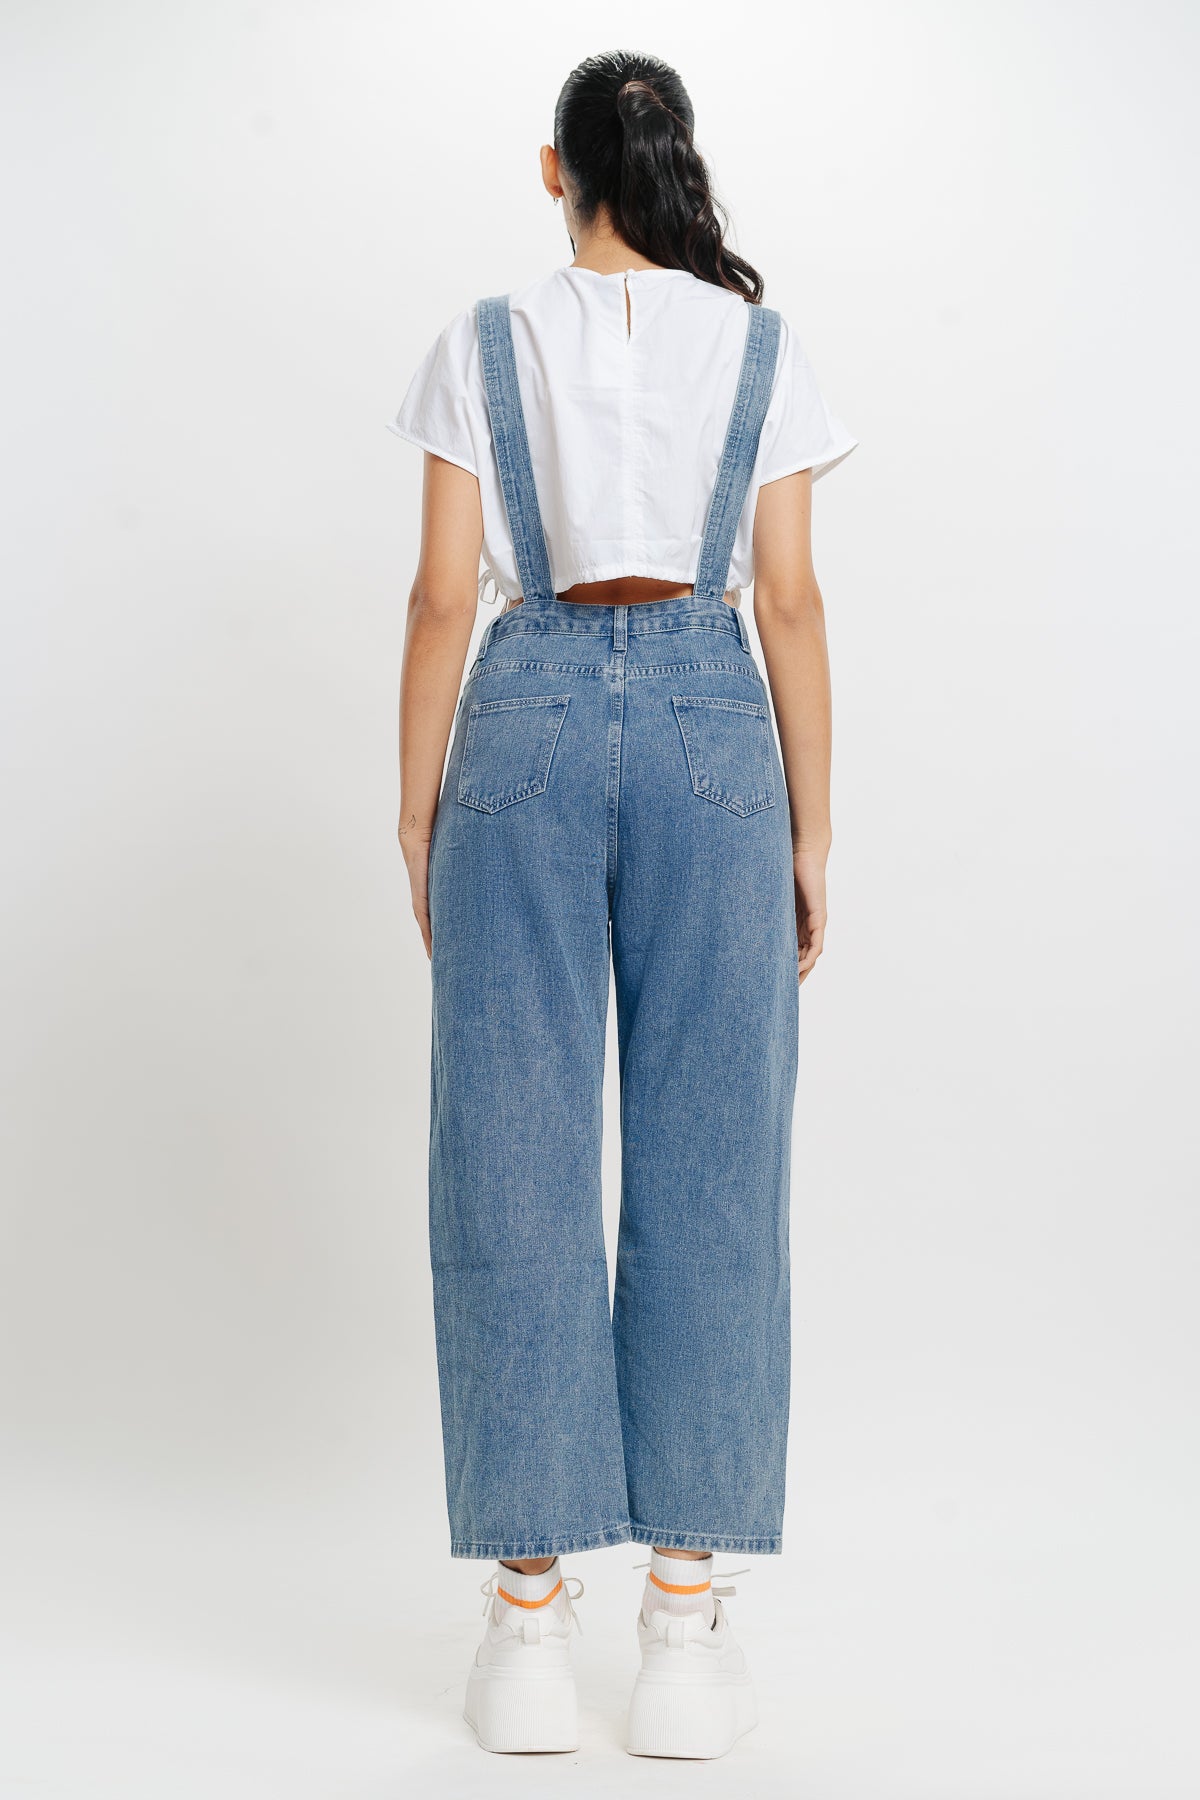 The Dungaree Dress for Girls: Effortless Style and Comfort Combined, by  Faiz Turnout